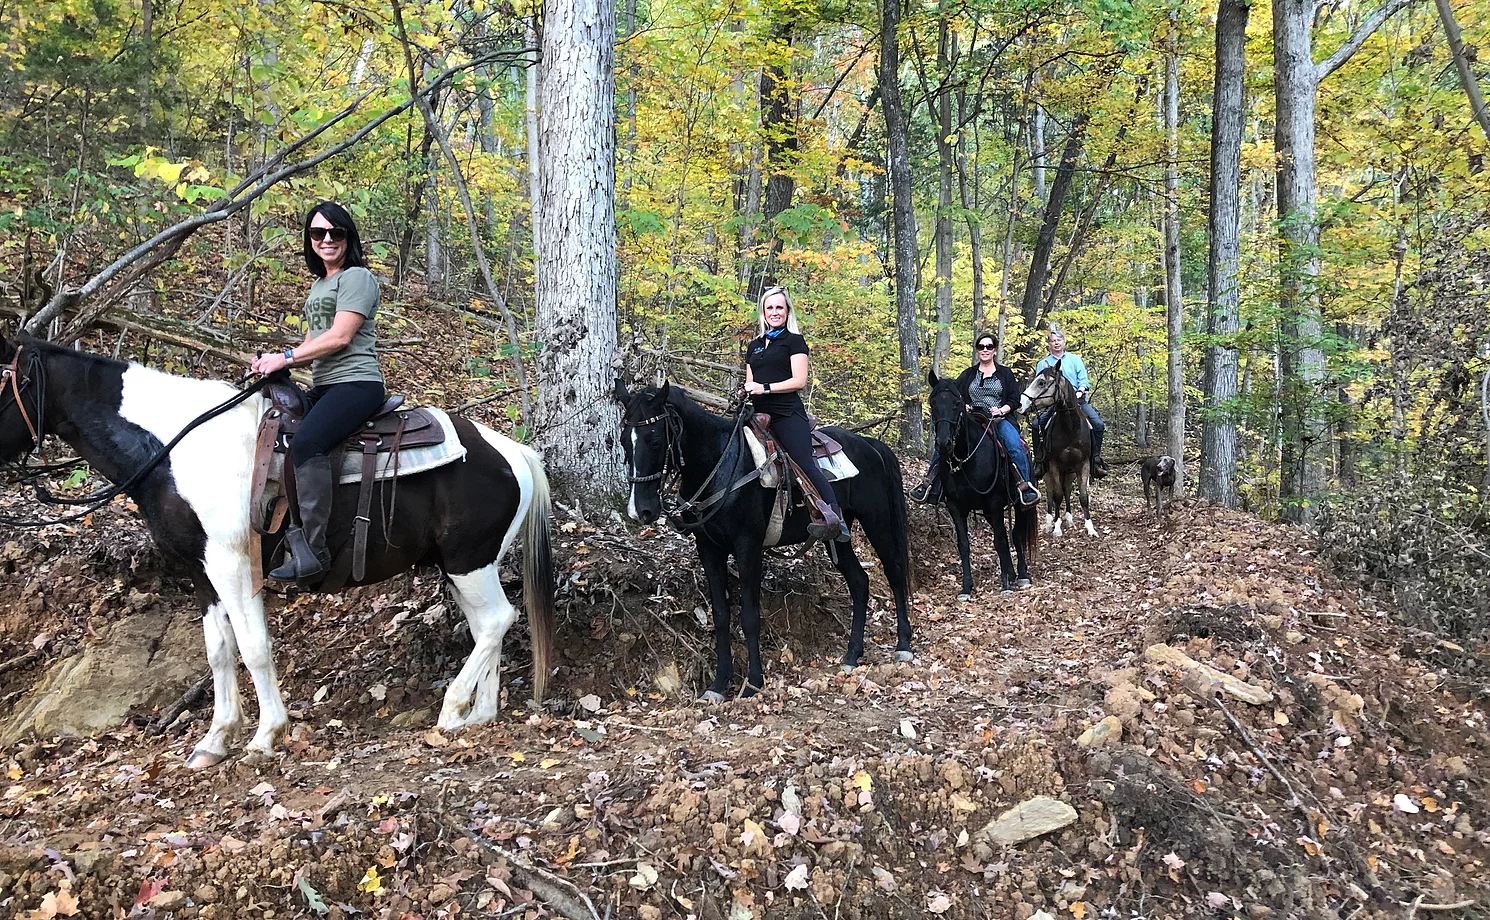 Four people riding horseback in the woods.